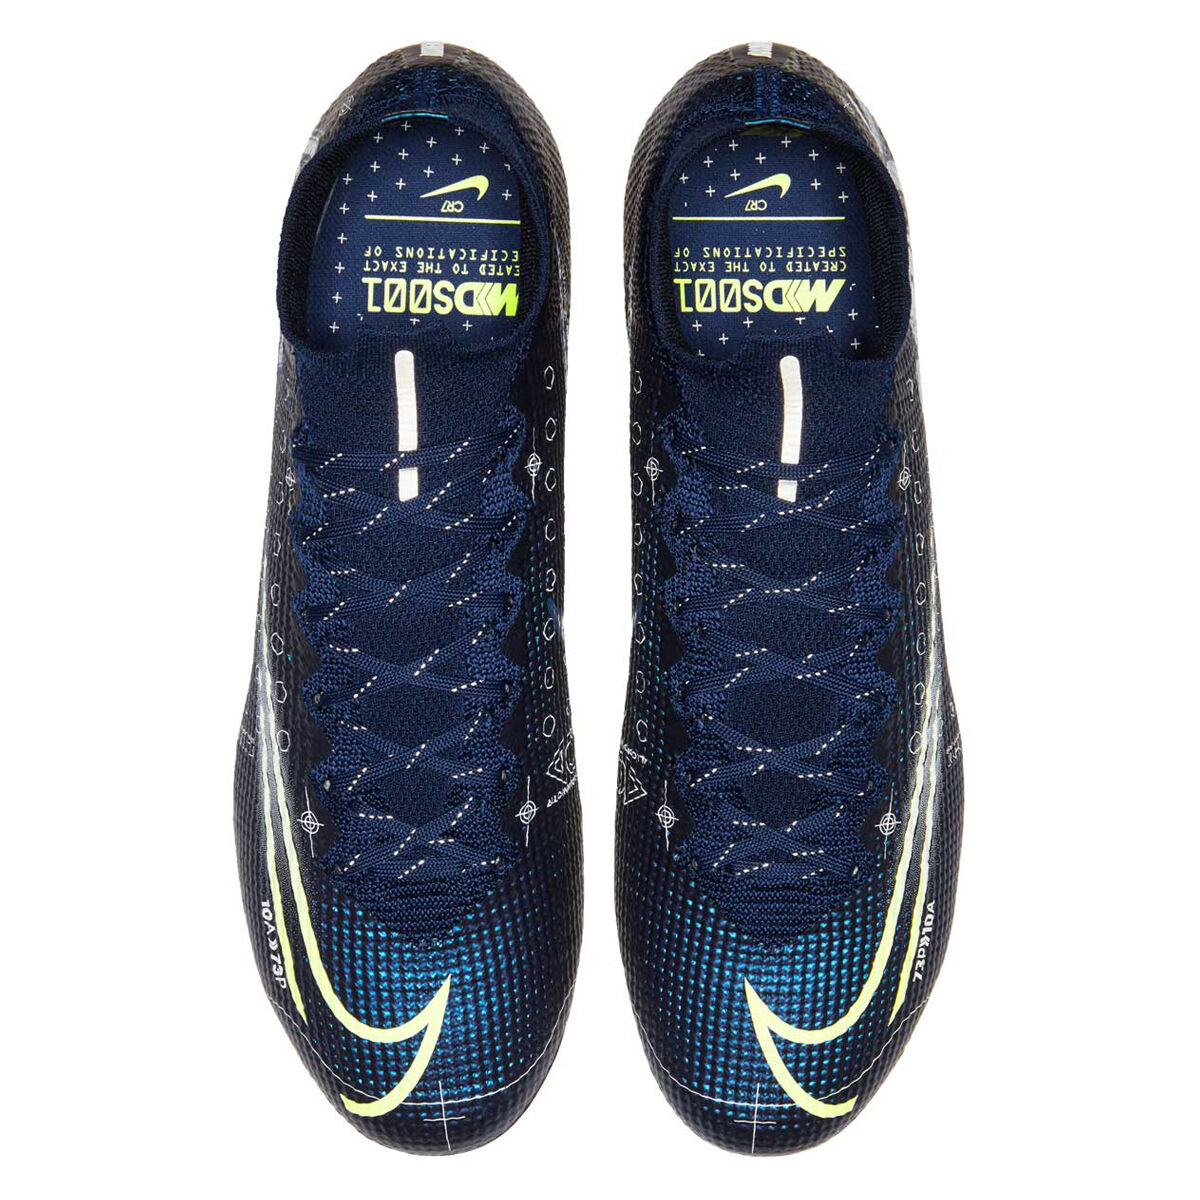 Football Boots Nike Mercurial Superfly VII Elite MDS 2.